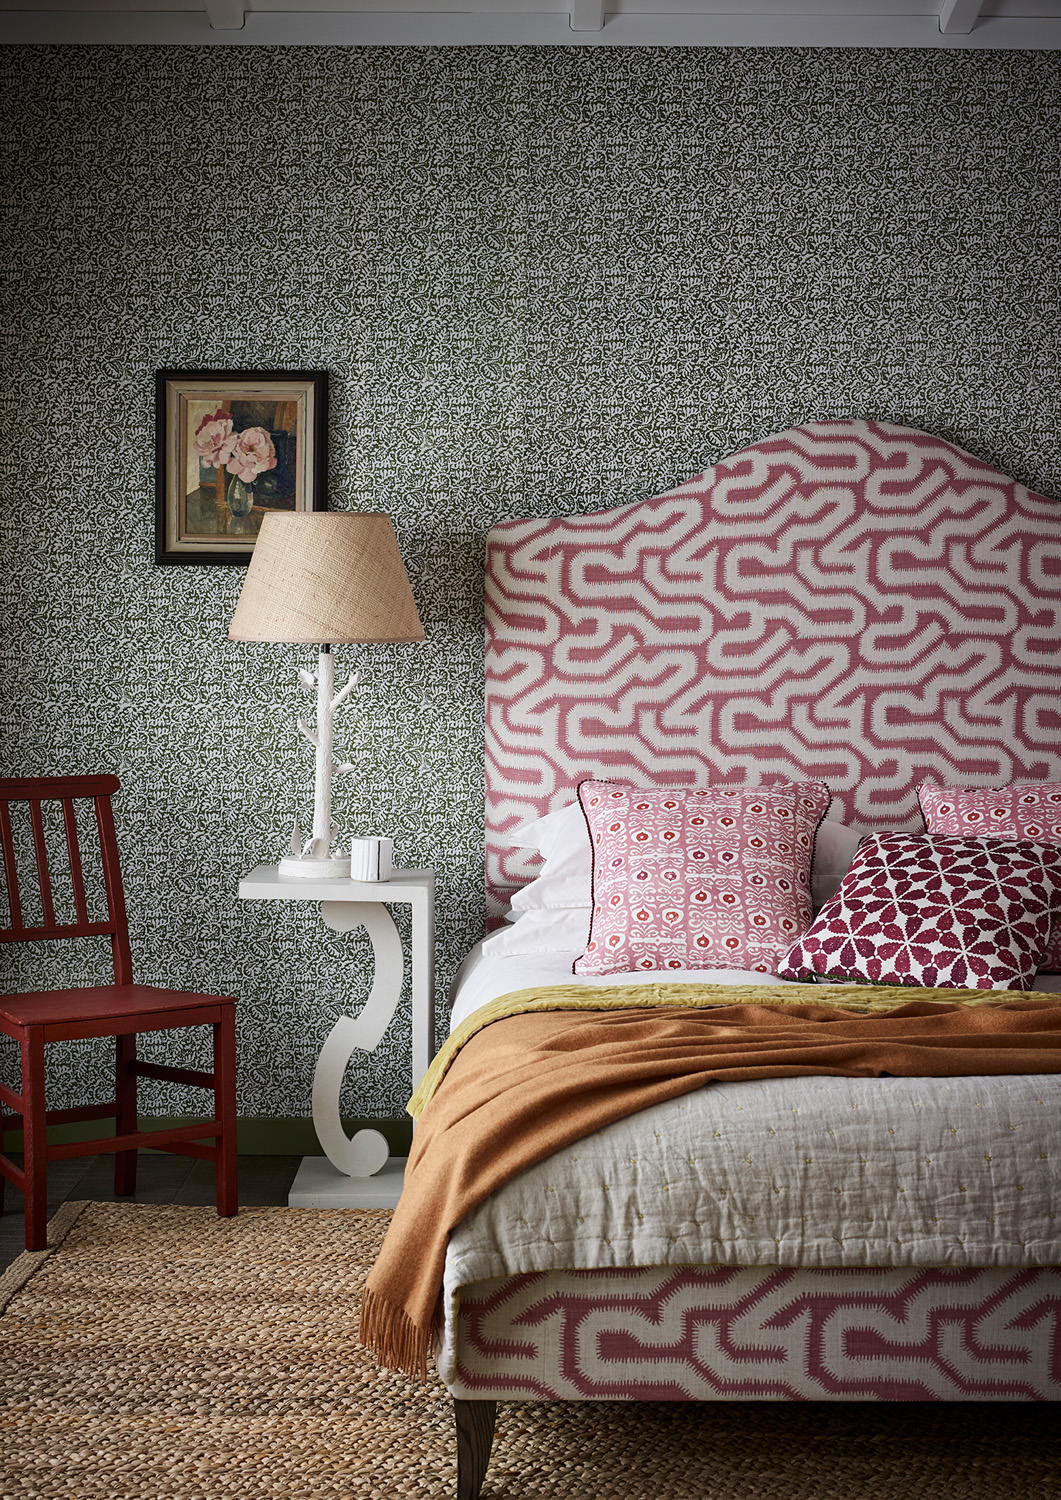 Bedhead by Rapture &amp; Wright - traditional British furniture and interior design